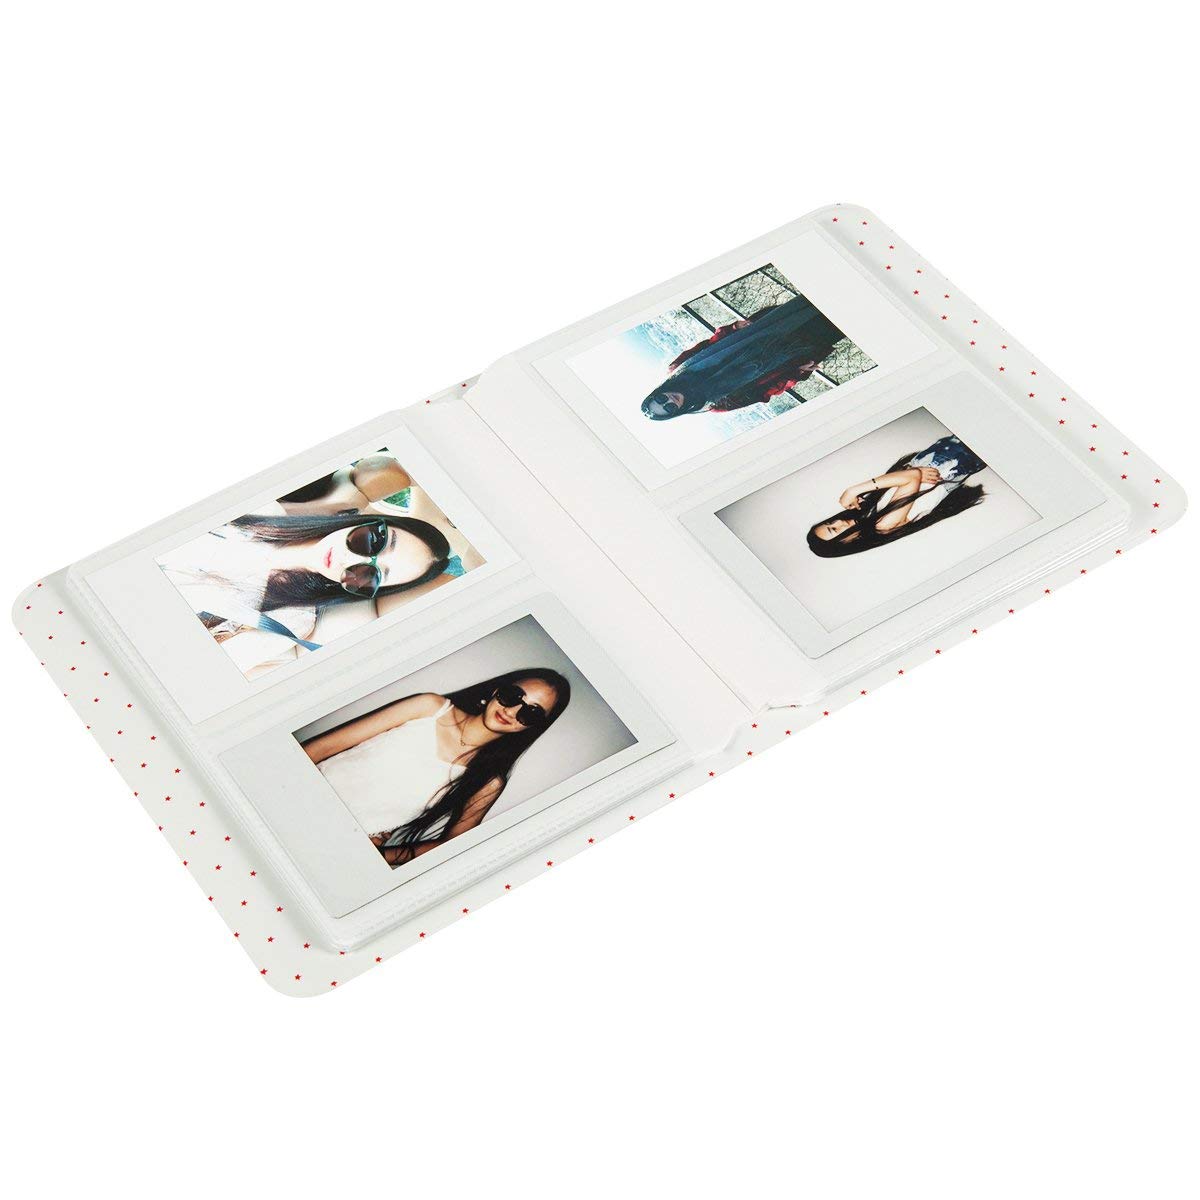 Fujifilm Instax Mini 6 Pack of 10 Sheets Instant Film with Instax Time Photo Album 64-Sheets